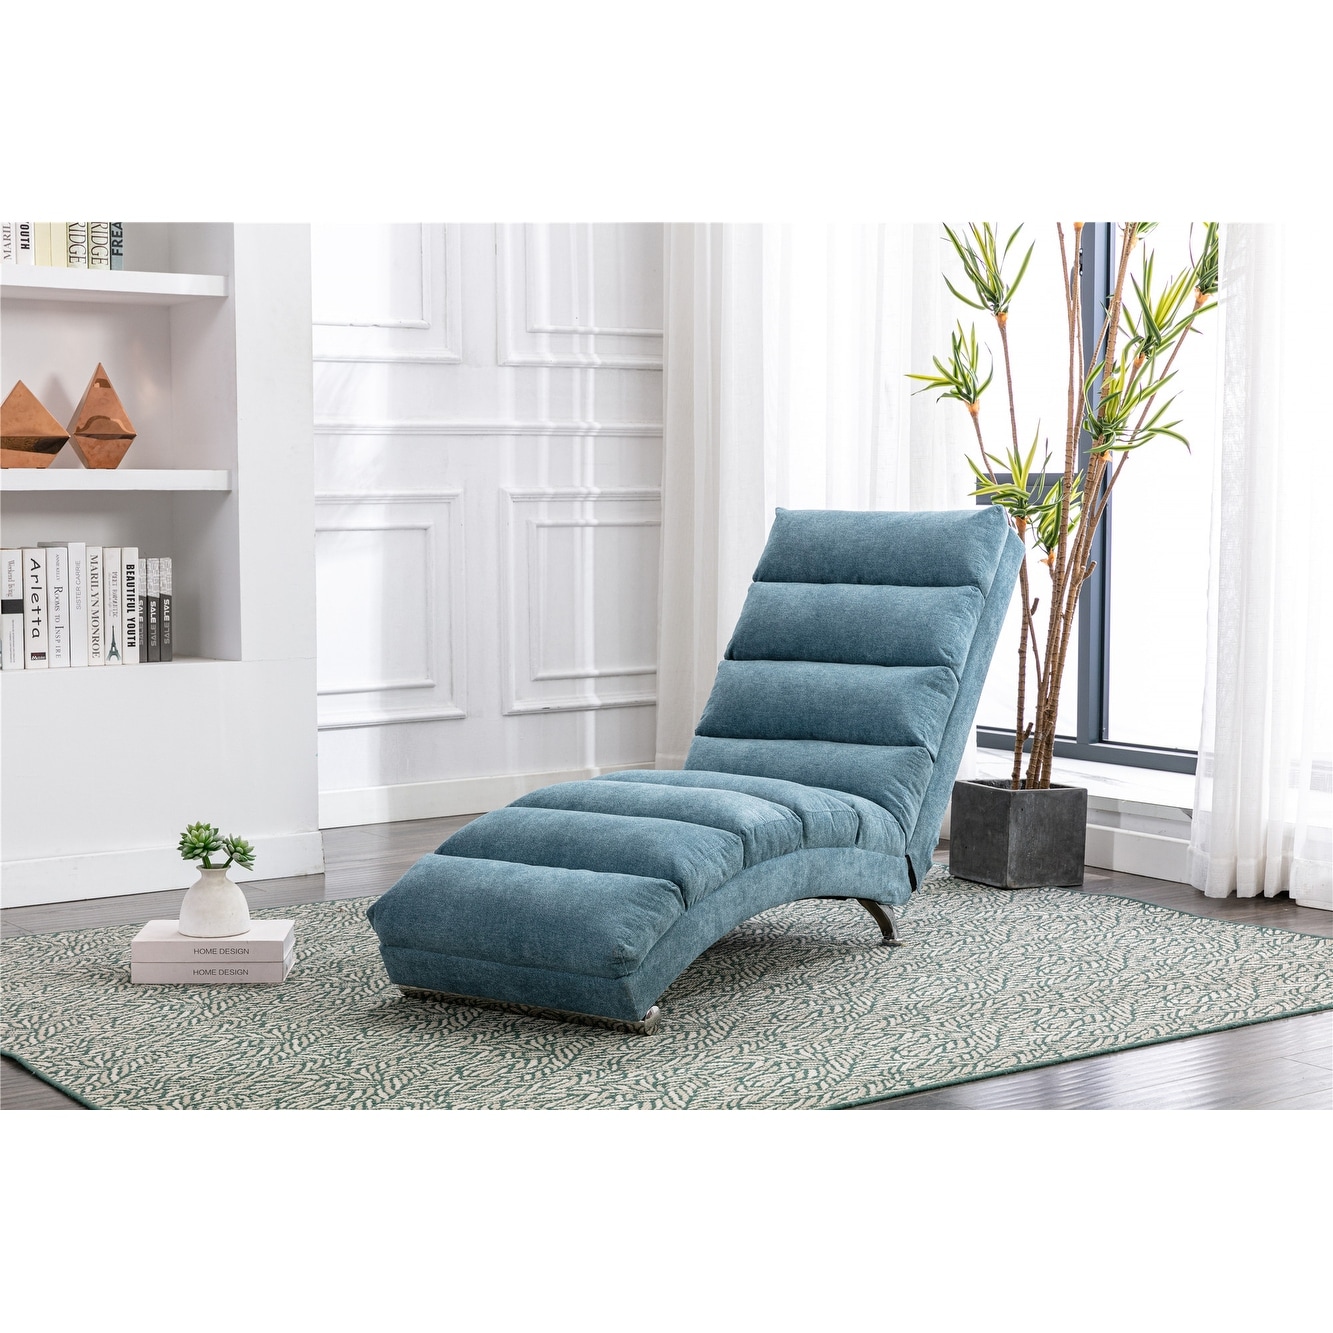 Modern Long Lounger Linen Chaise Lounge Indoor Chair For Living Room Backrest Adjustable Sofas Ergonomically Massage Chair